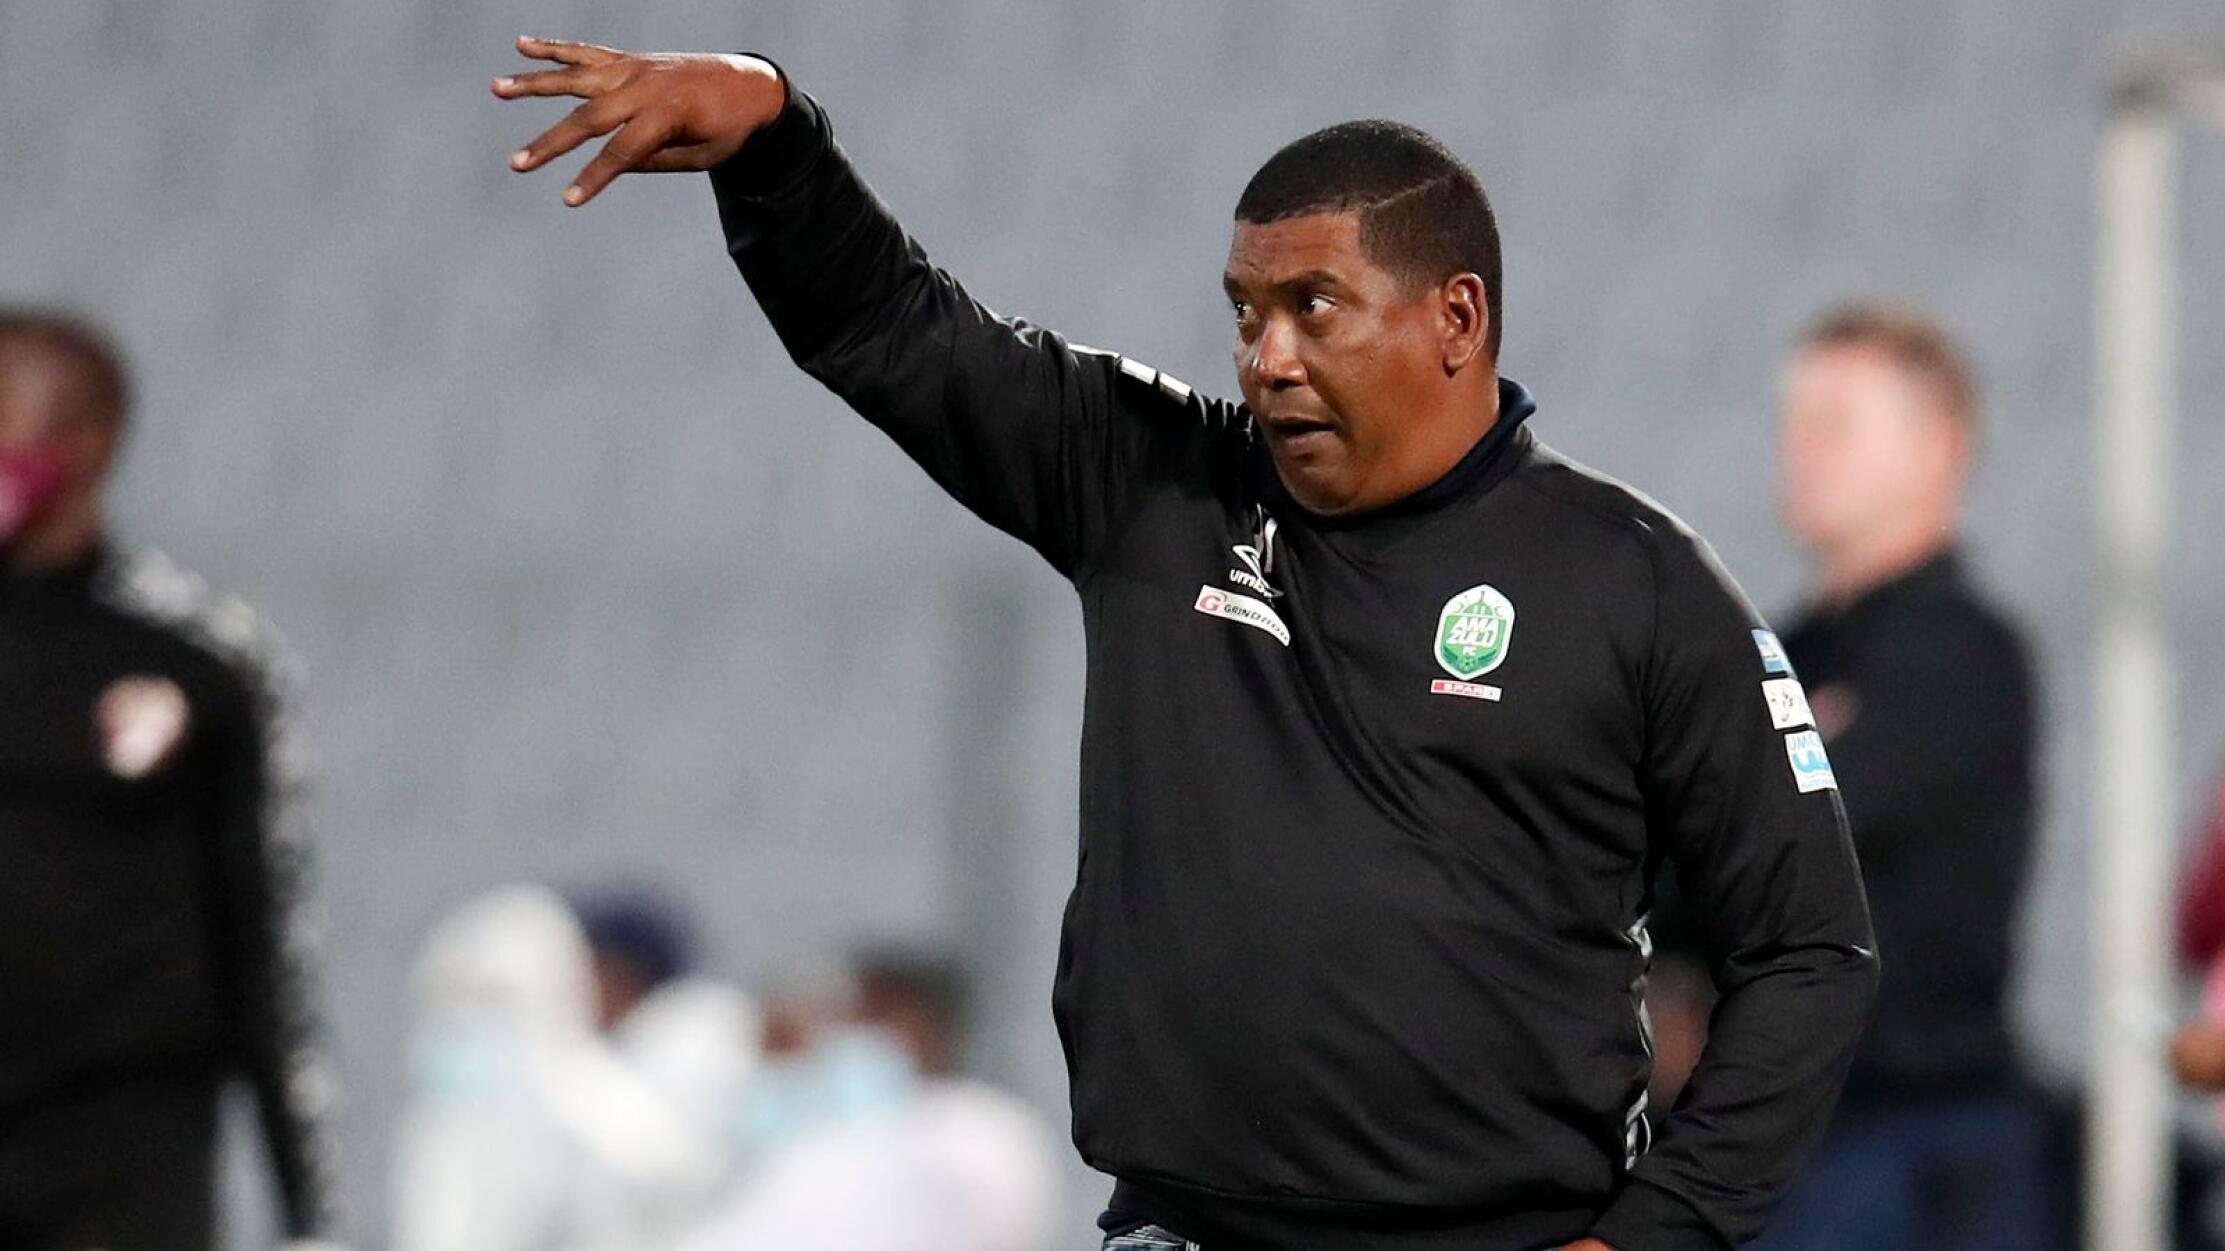 AmaZulu head coach Brandon Truter reacts during their DStv Premiership match against Swallows FC at the Dobsonville Stadium in Soweto on Tuesday